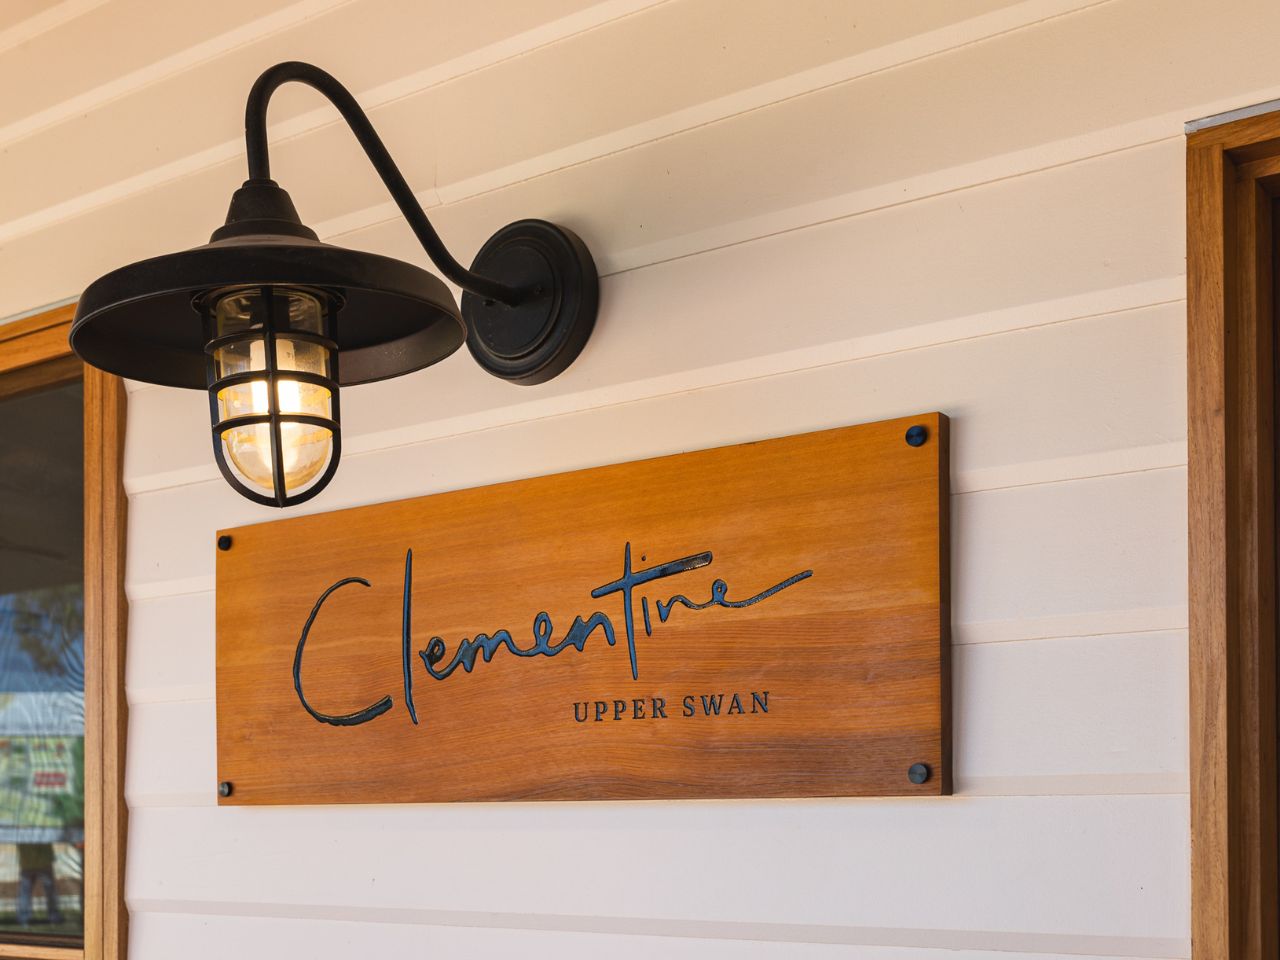 Clementine, Upper Swan wooden sign and lamp